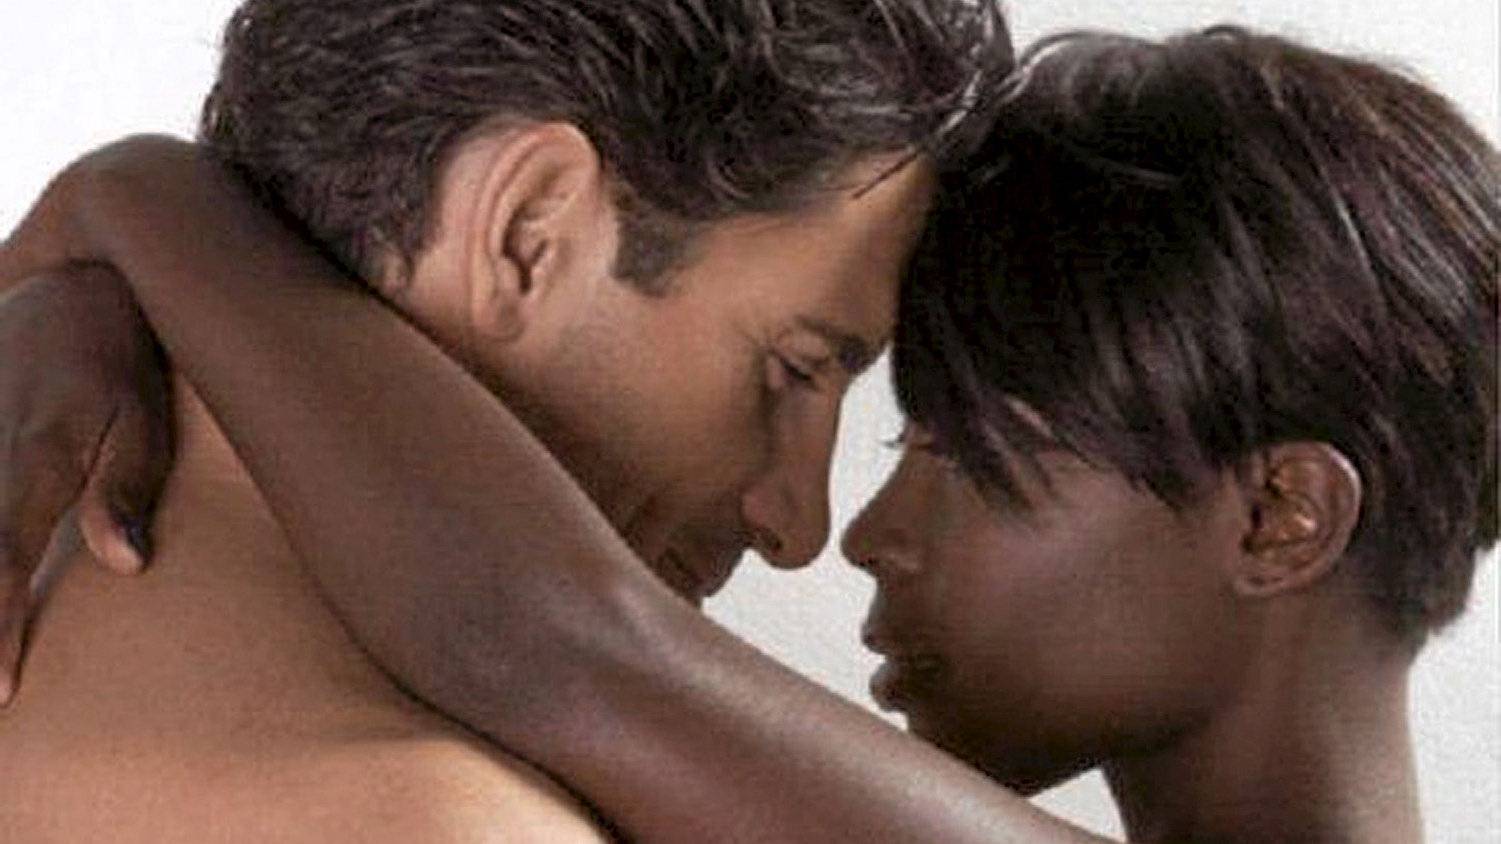 Sexy interracial poster sparks furor in South Africa pic